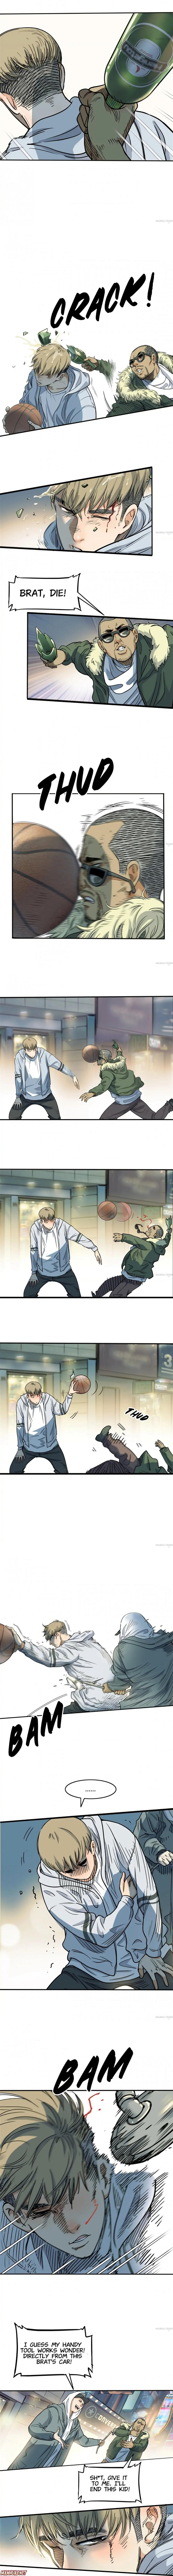 Streetball in the Hood Chapter 7 - Page 4